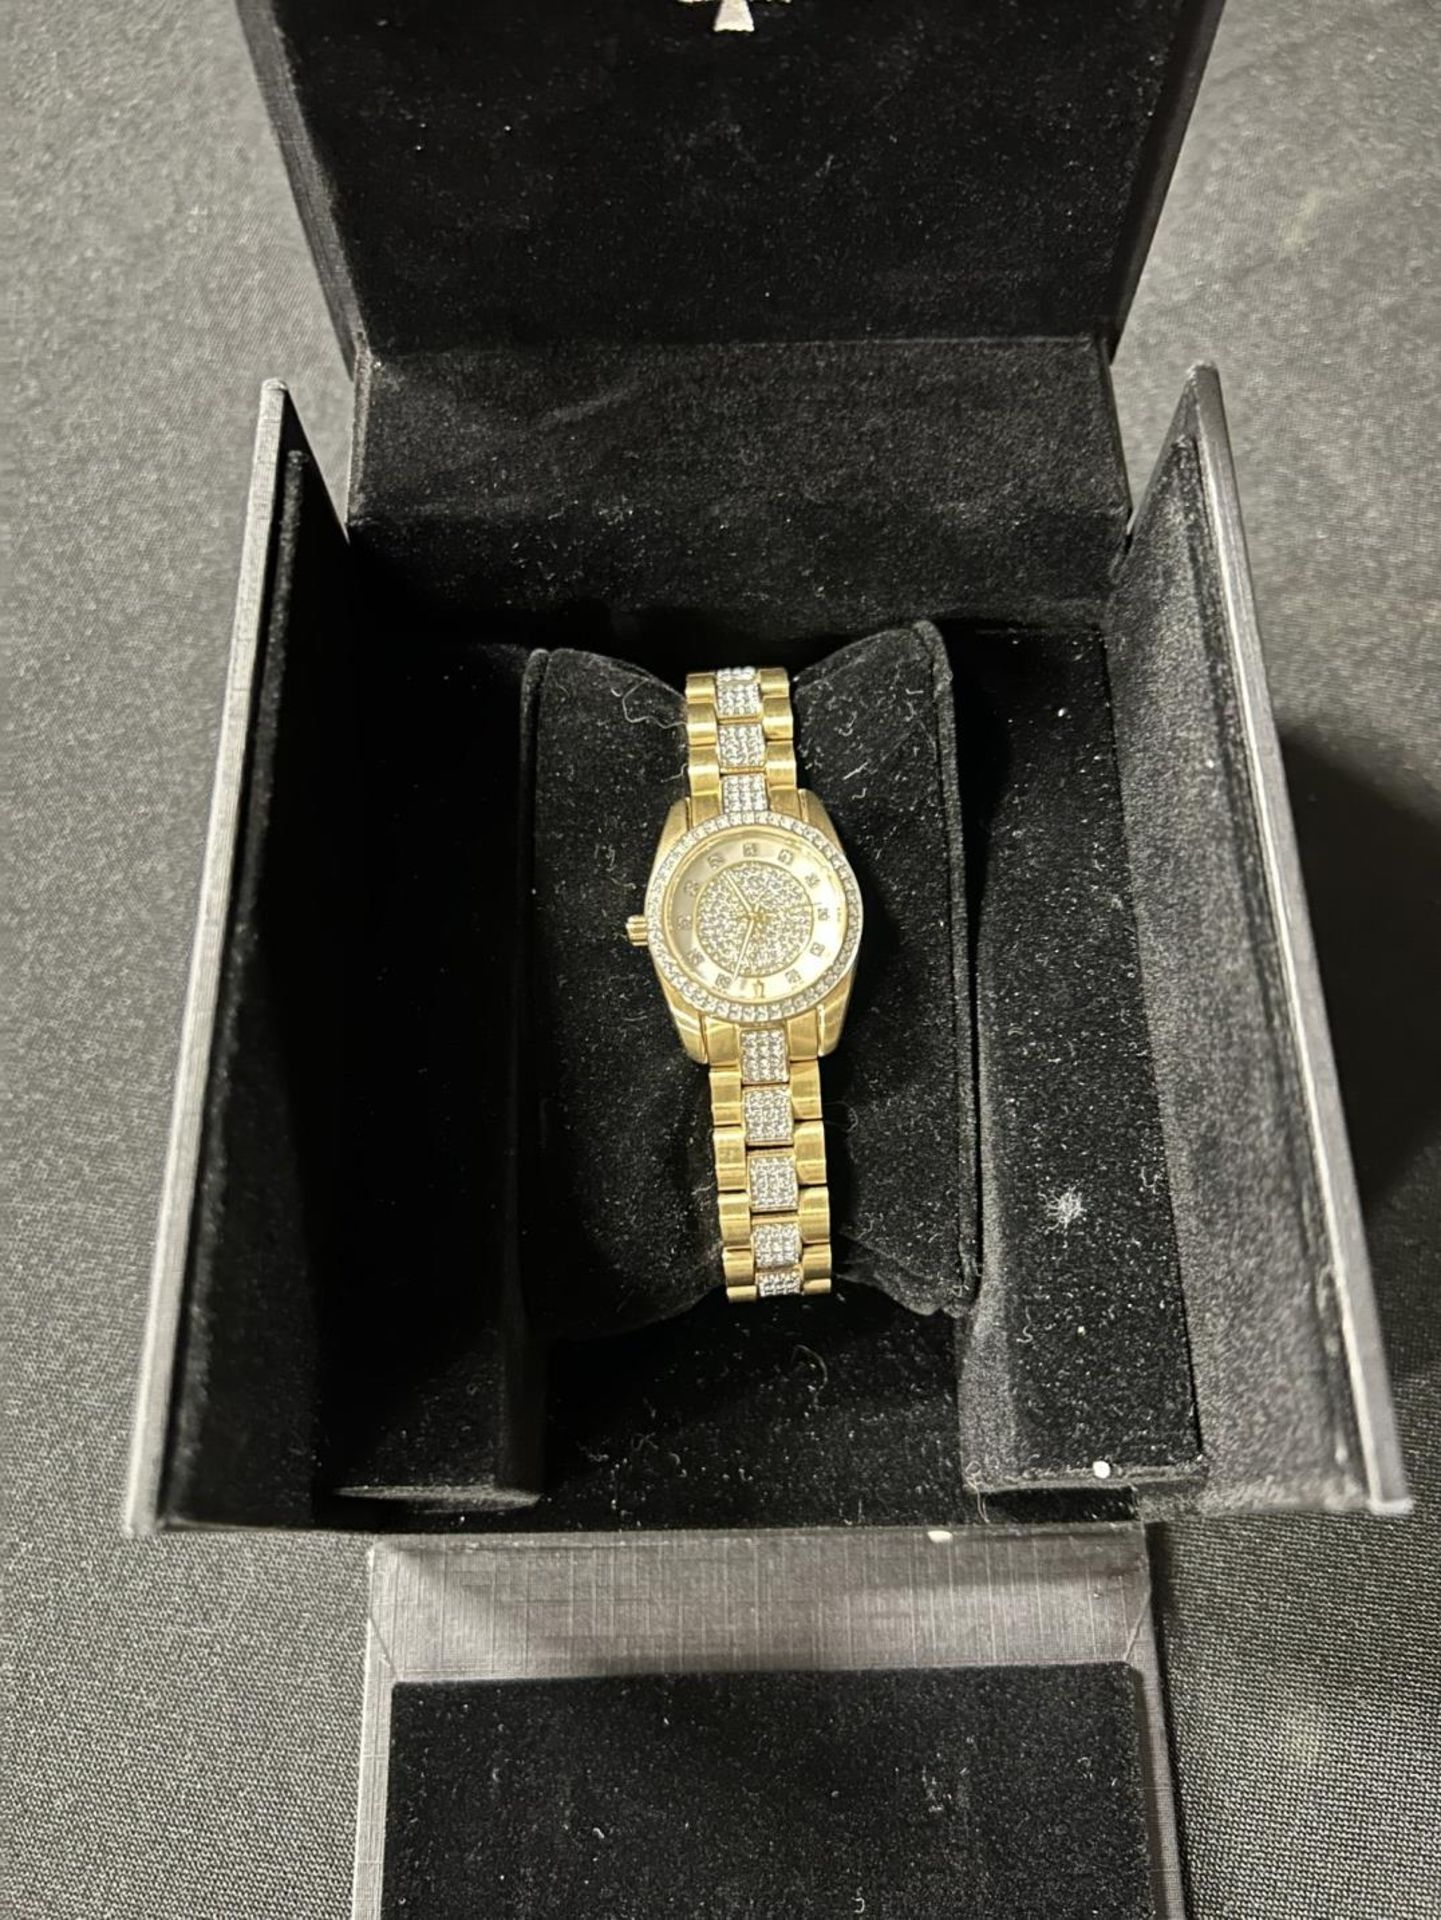 WOMEN'S BULOVA MOTHER OF PEARL DIAL WATCH - Image 2 of 6